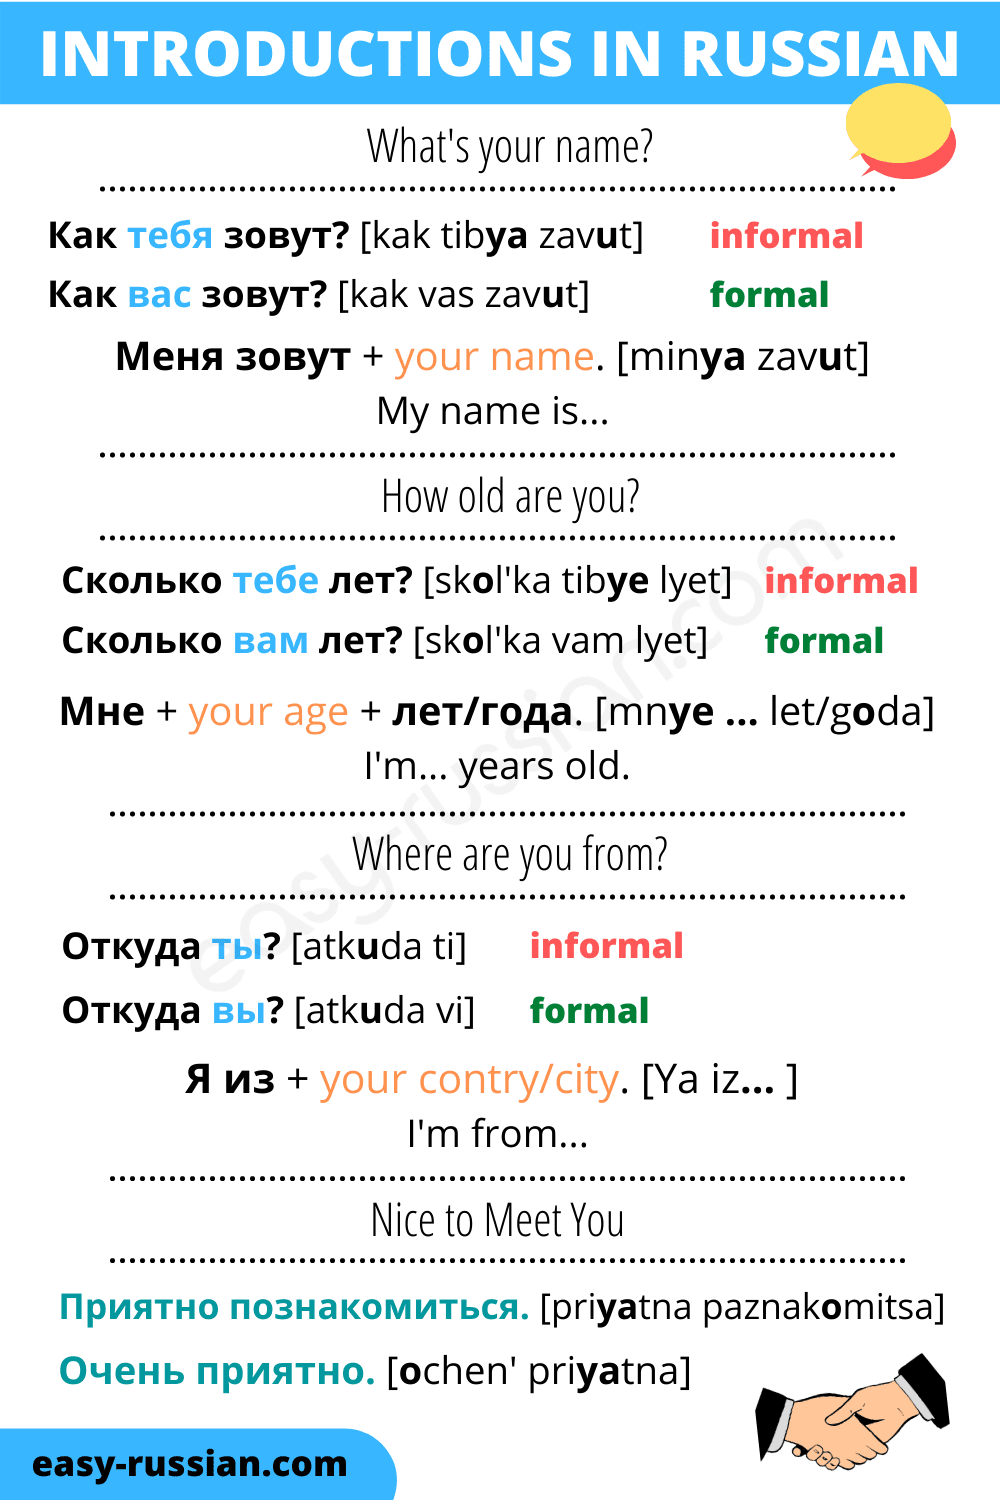 Introductions in Russian: how to say your name, age and place